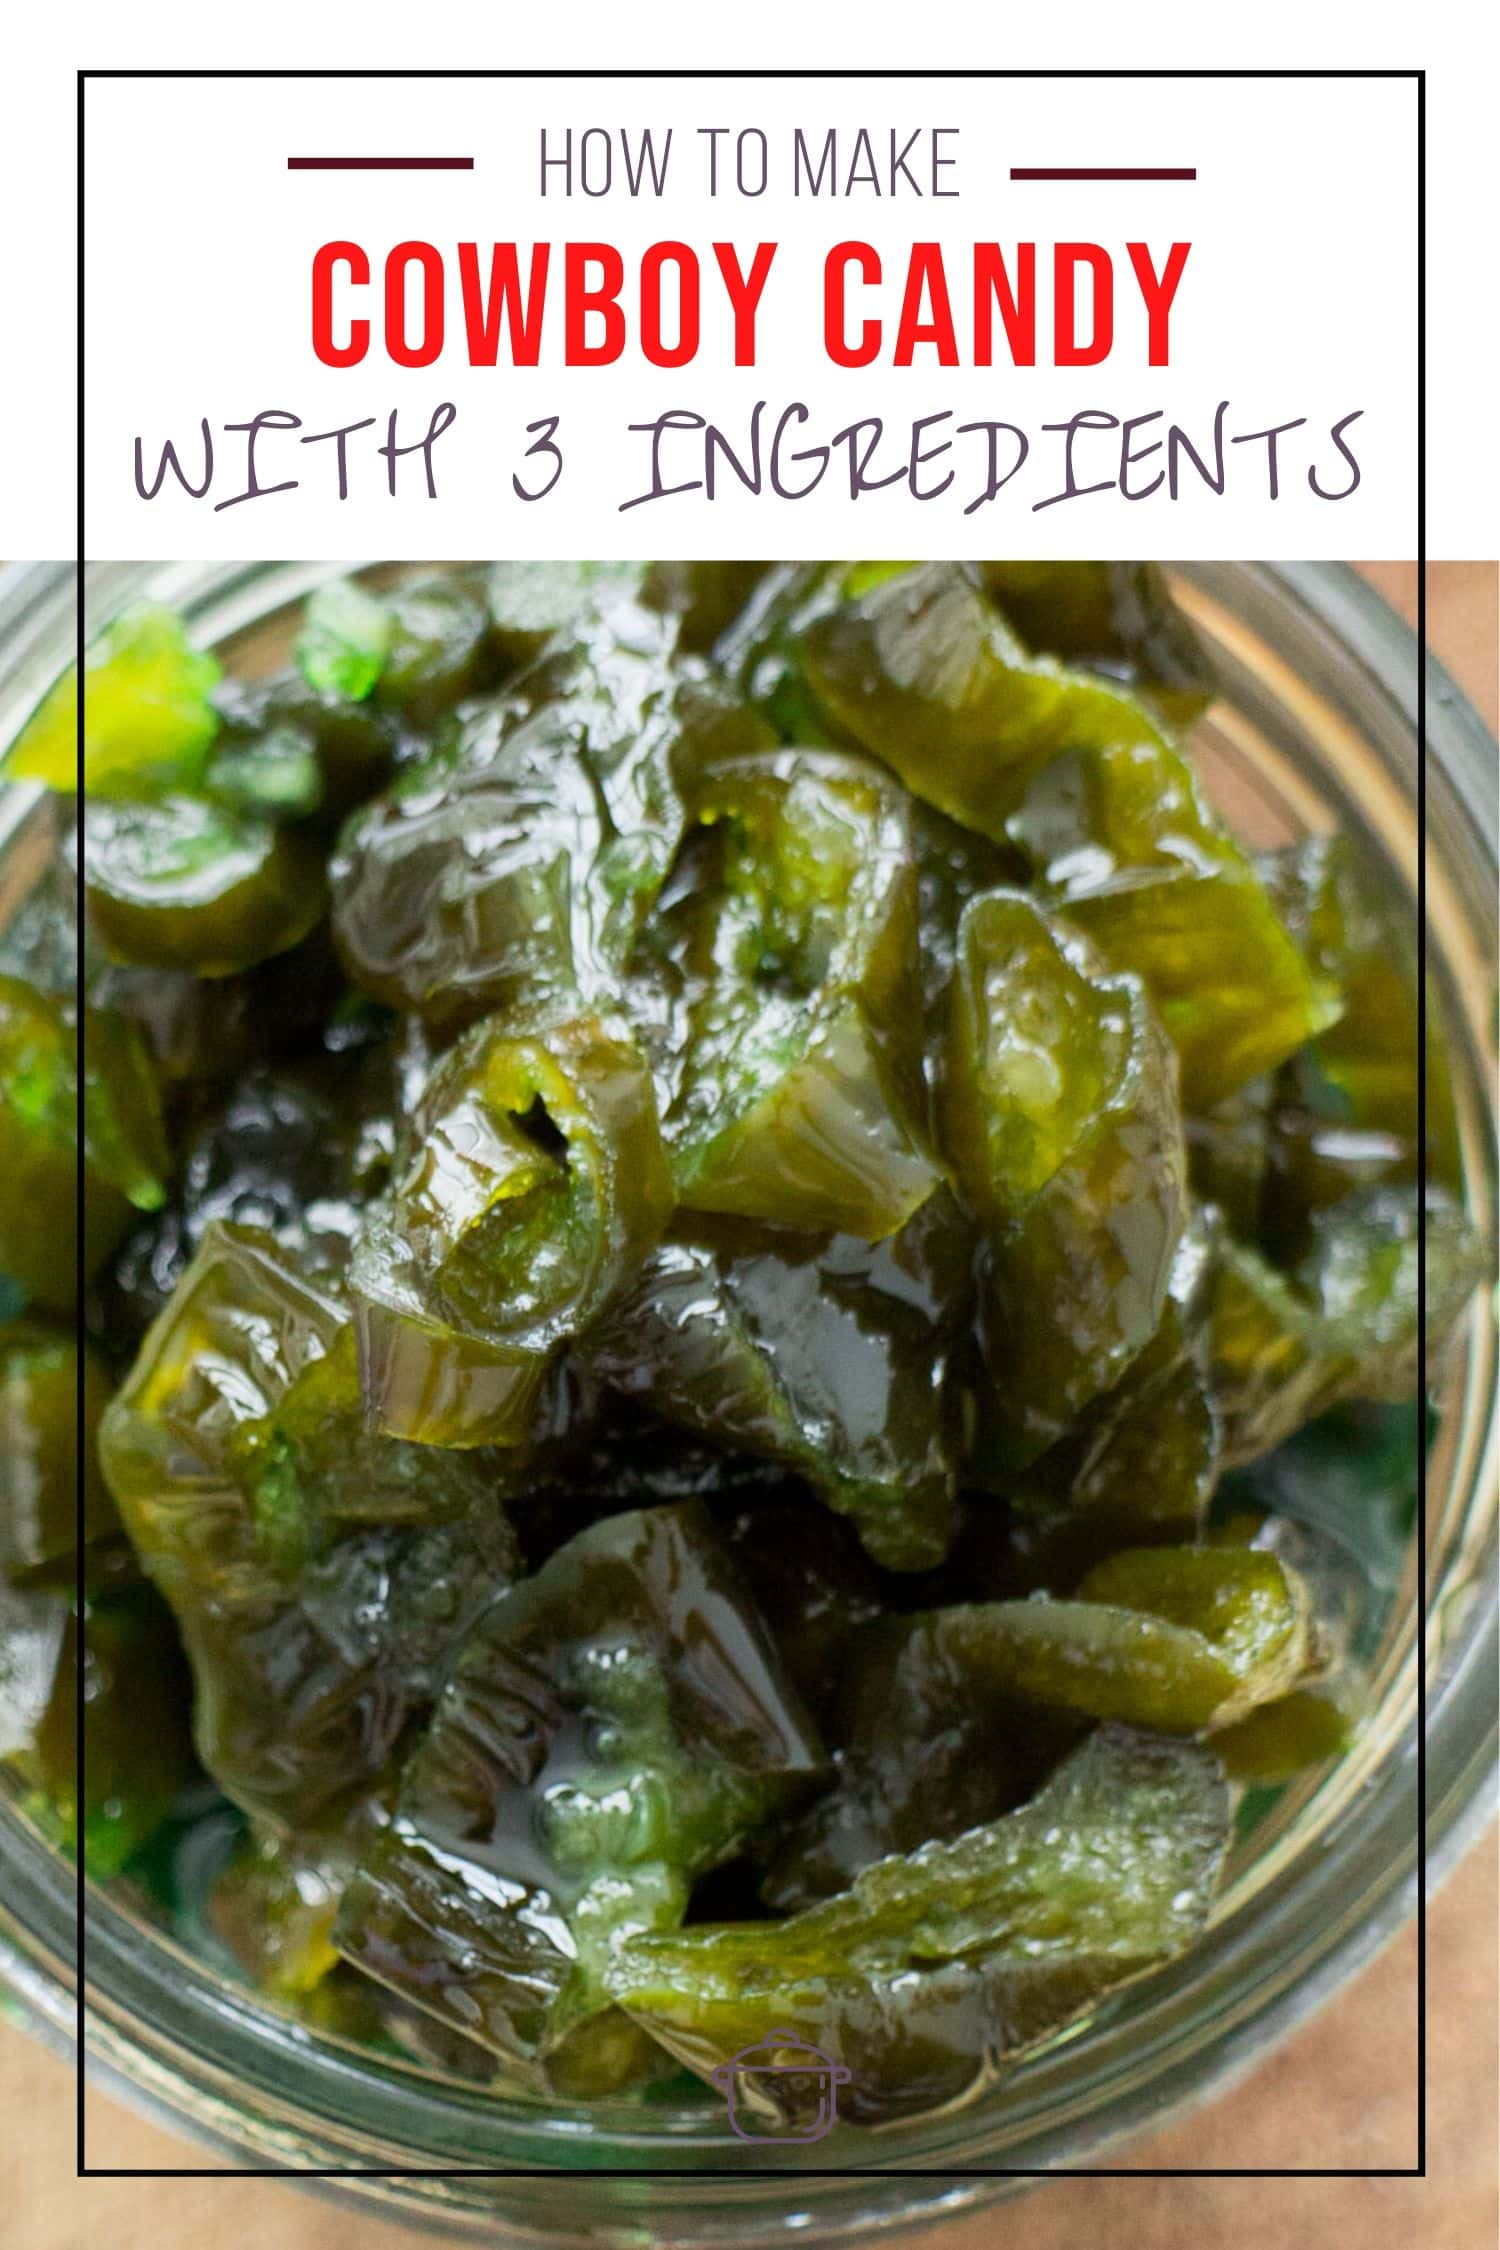 Candied Jalapenos Recipe - You Only Need 3 Ingredients!